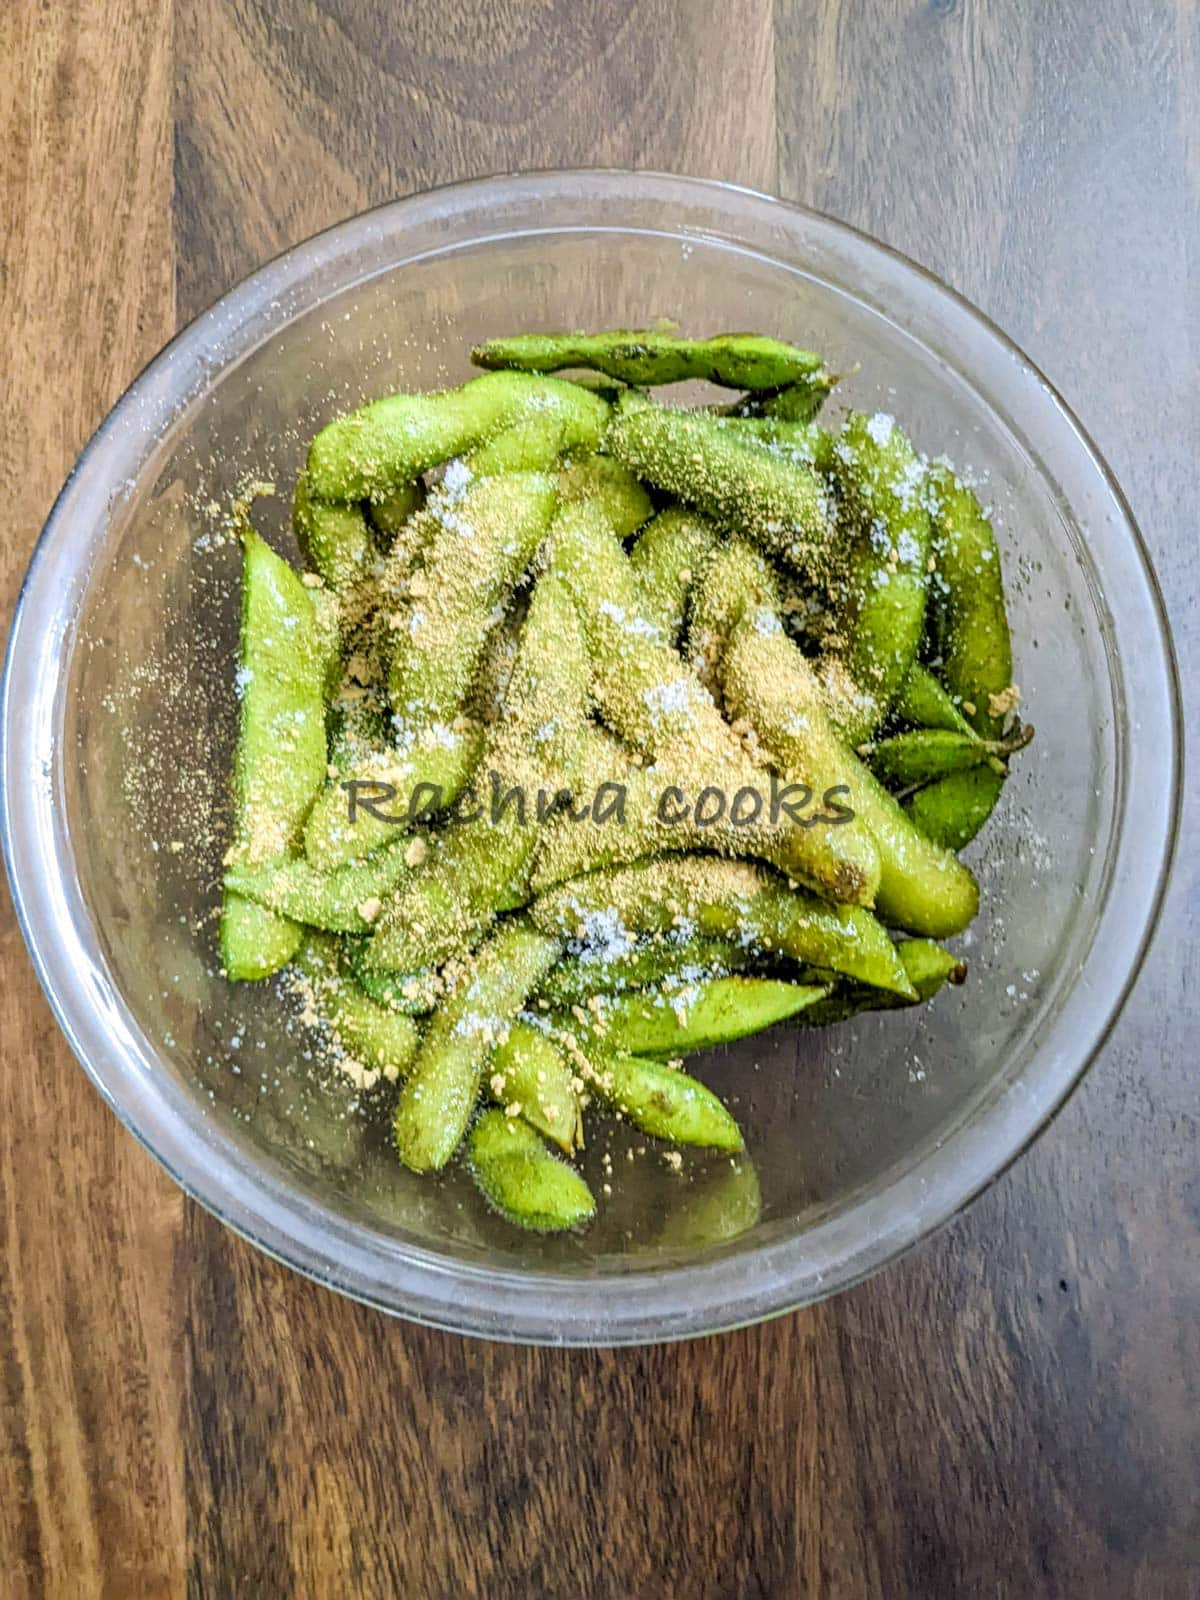 Edamame with oil and seasonings.